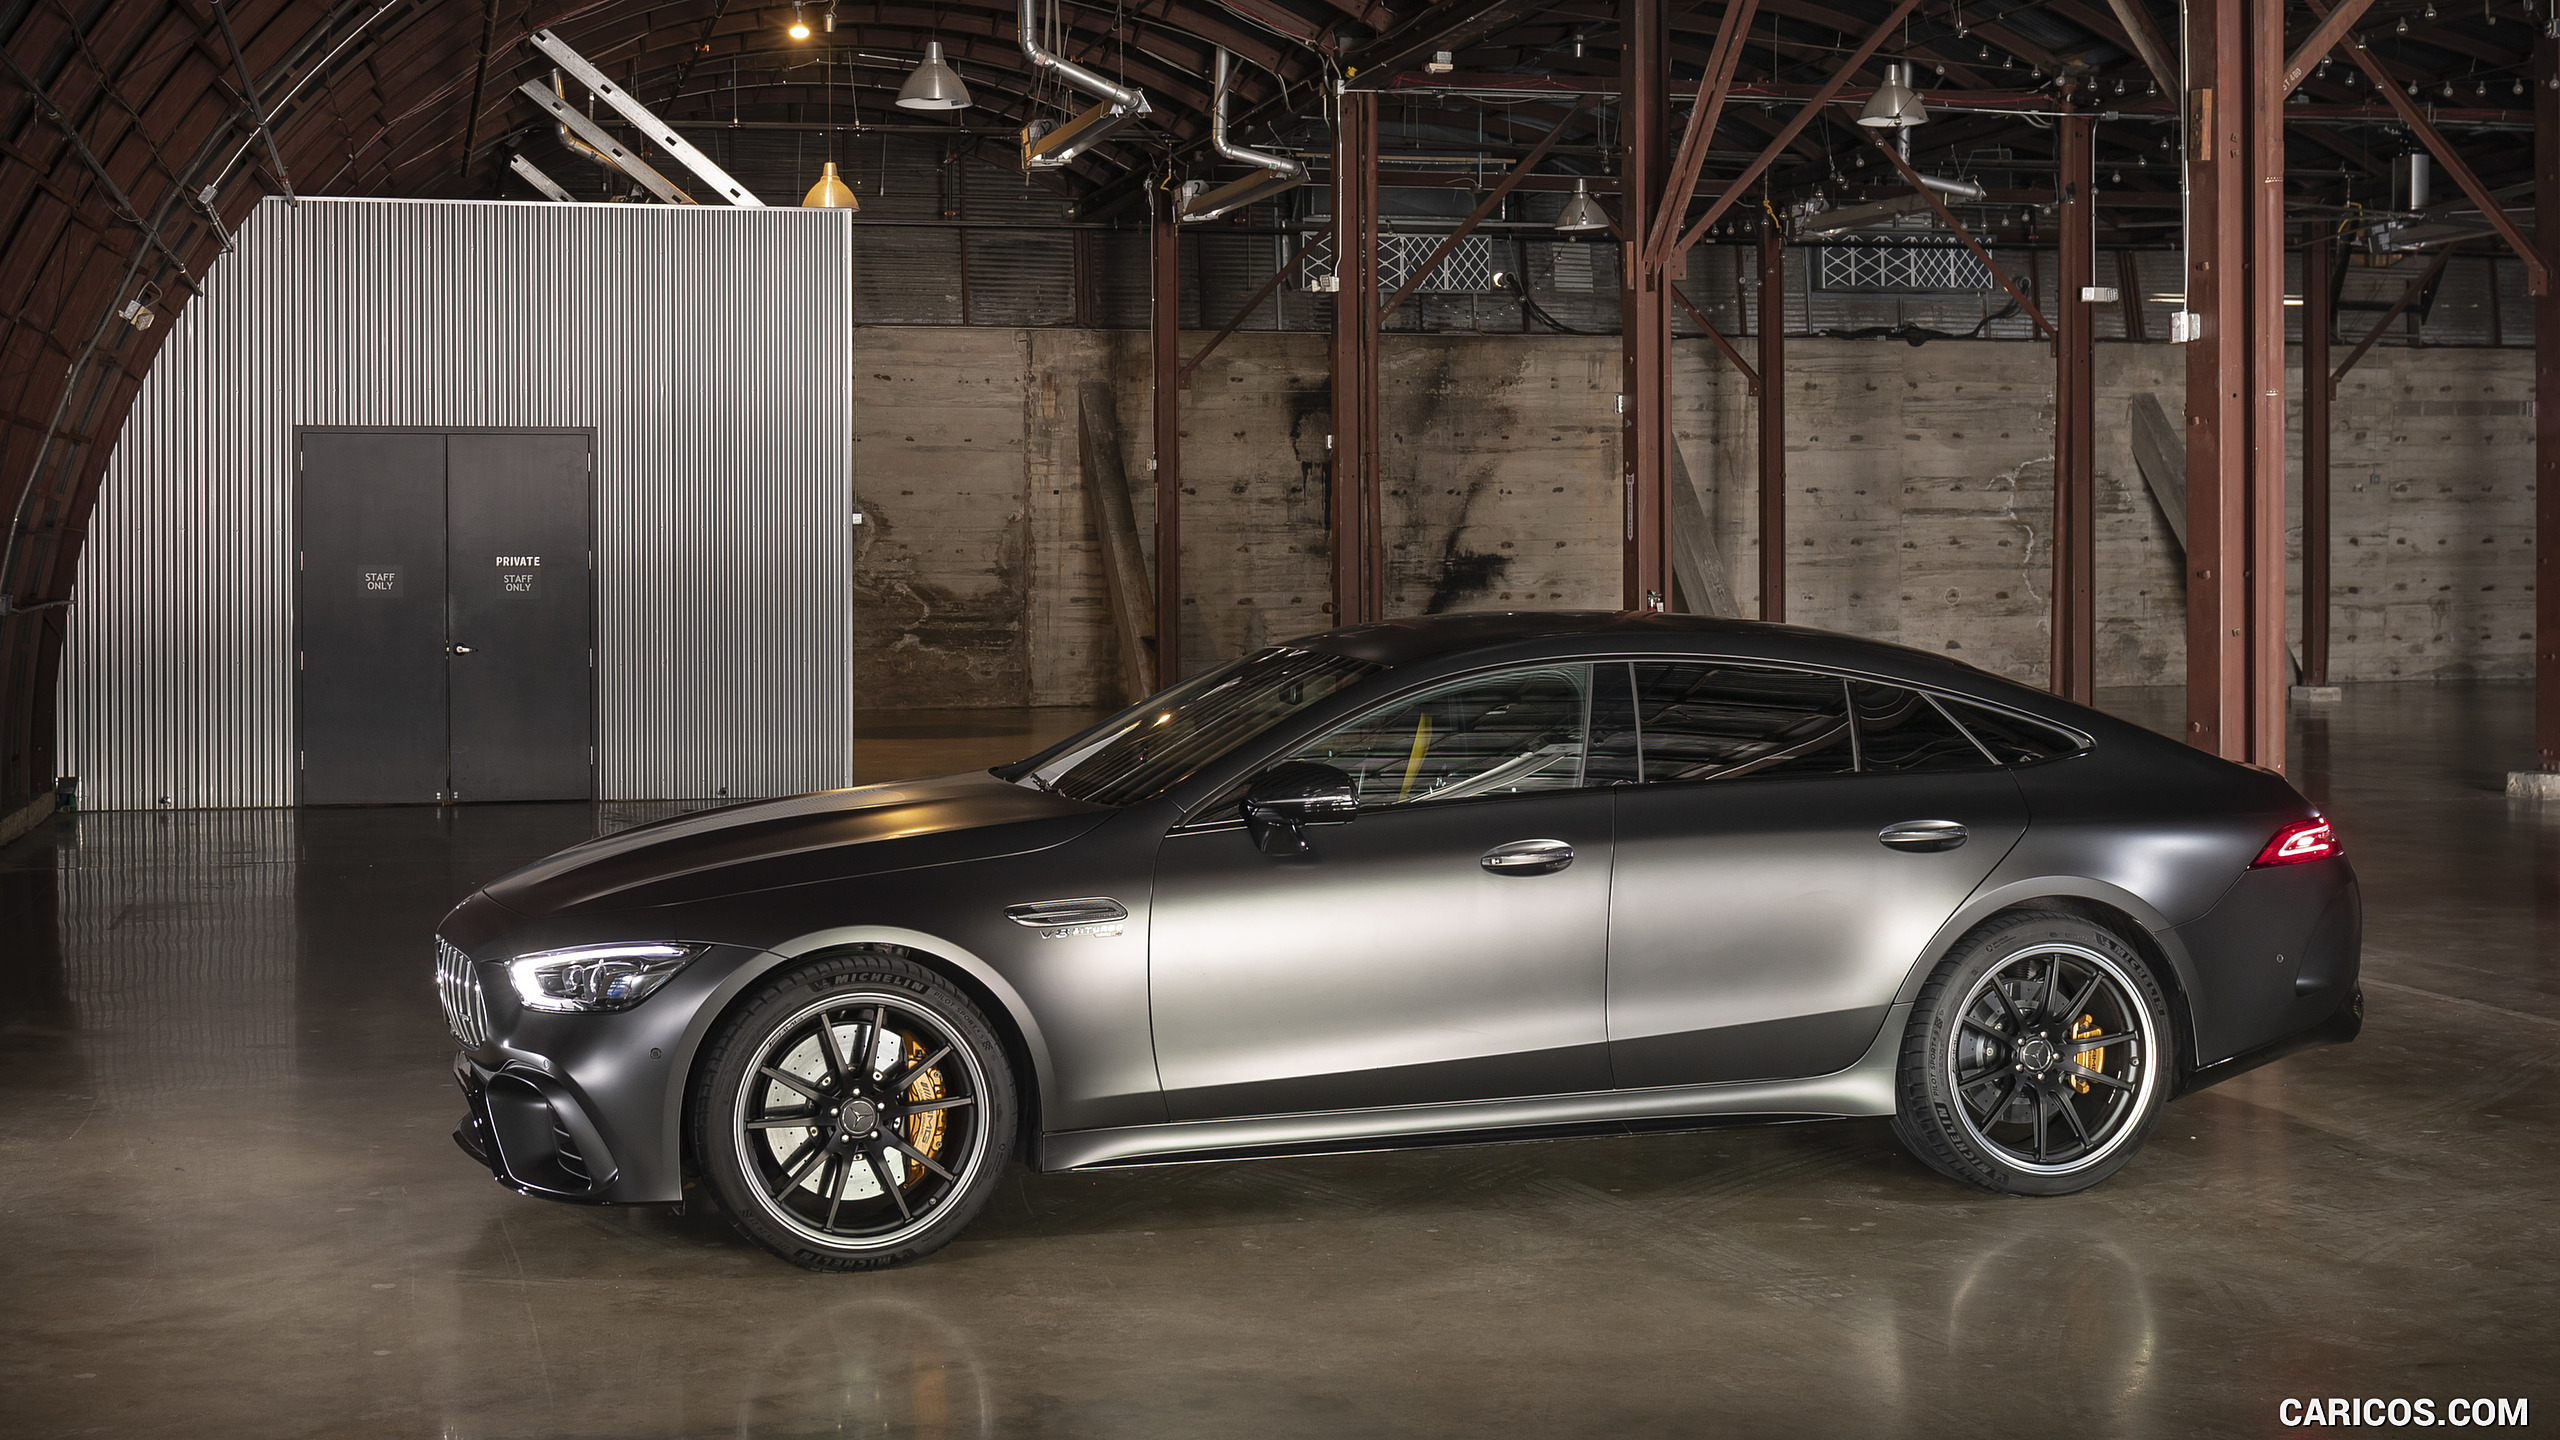 2019 Mercedes-AMG GT 63 S 4MATIC+ 4-Door Coupe - Side, #221 of 427